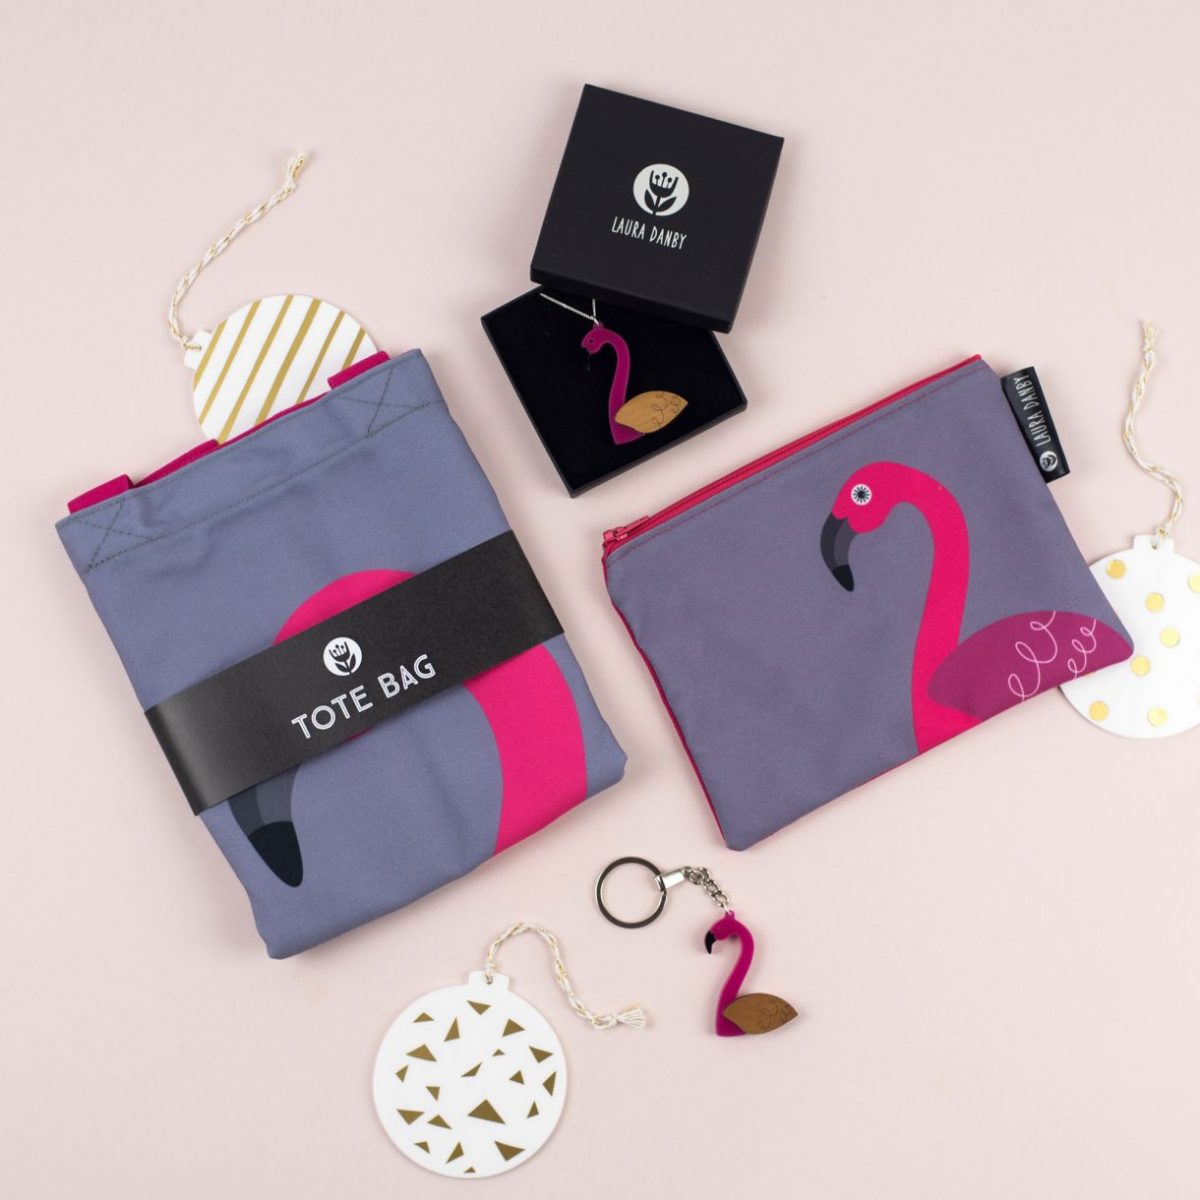 Flamingo Bird Tropical Gift Set, Tote Bag, Pencil Case, Necklace and Keyring Gift Set For Her, For Women, For Christmas, Fun Gifts For Kids